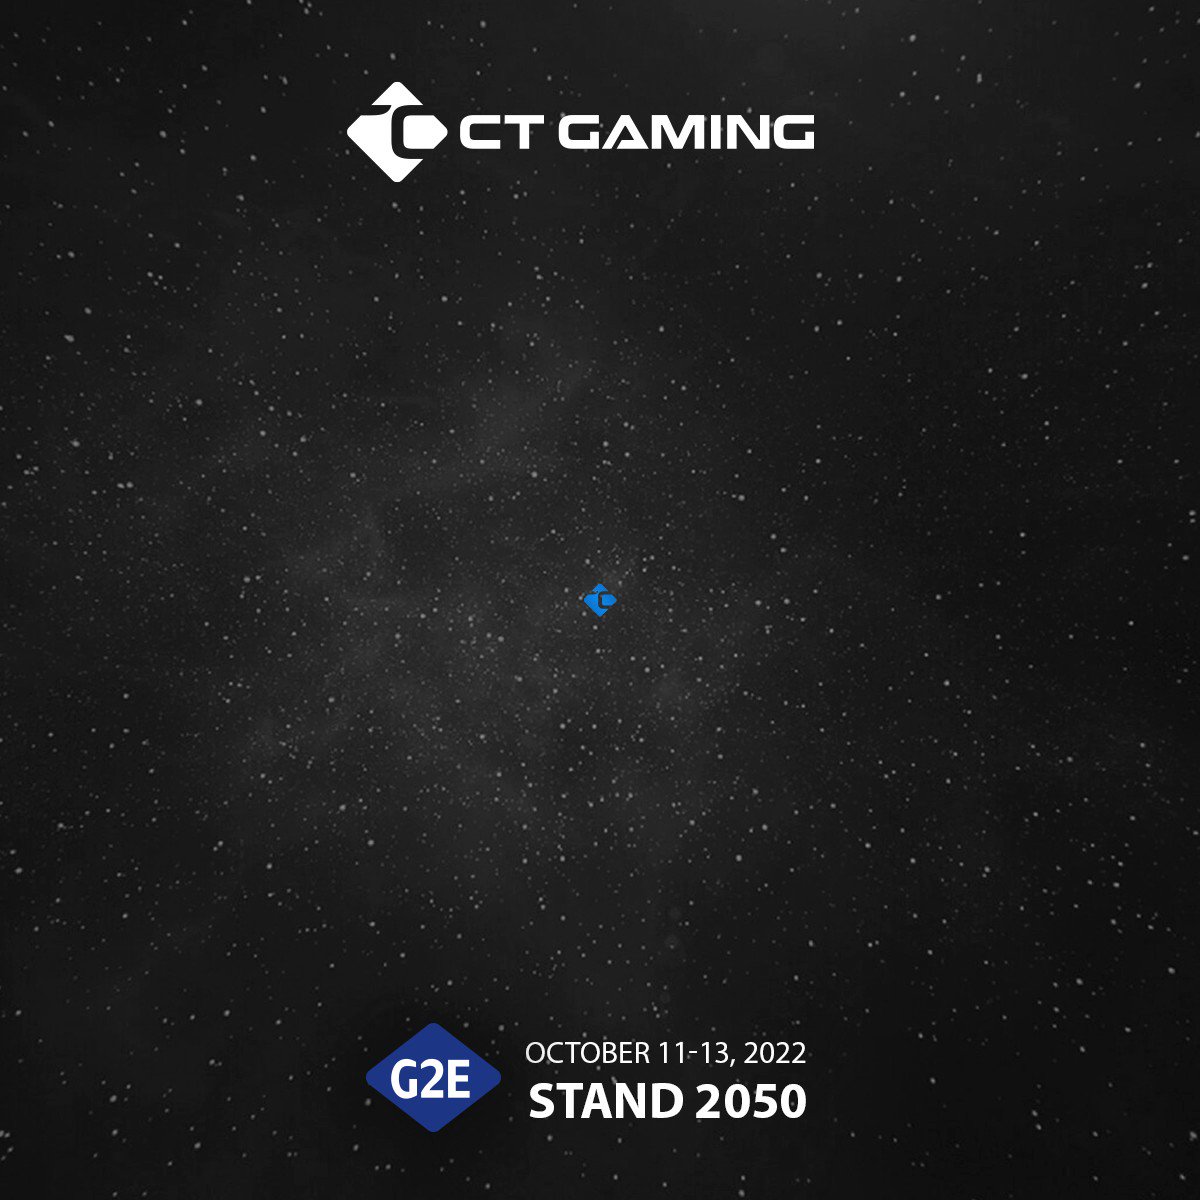 Find us at stand #2050 during G2E, Las Vegas. It would be a pleasure to show you our latest slot machine, multigames with progressive jackpot, casino management system and more.
See you there. If you want to book a meeting, please drop us a line at sales.com